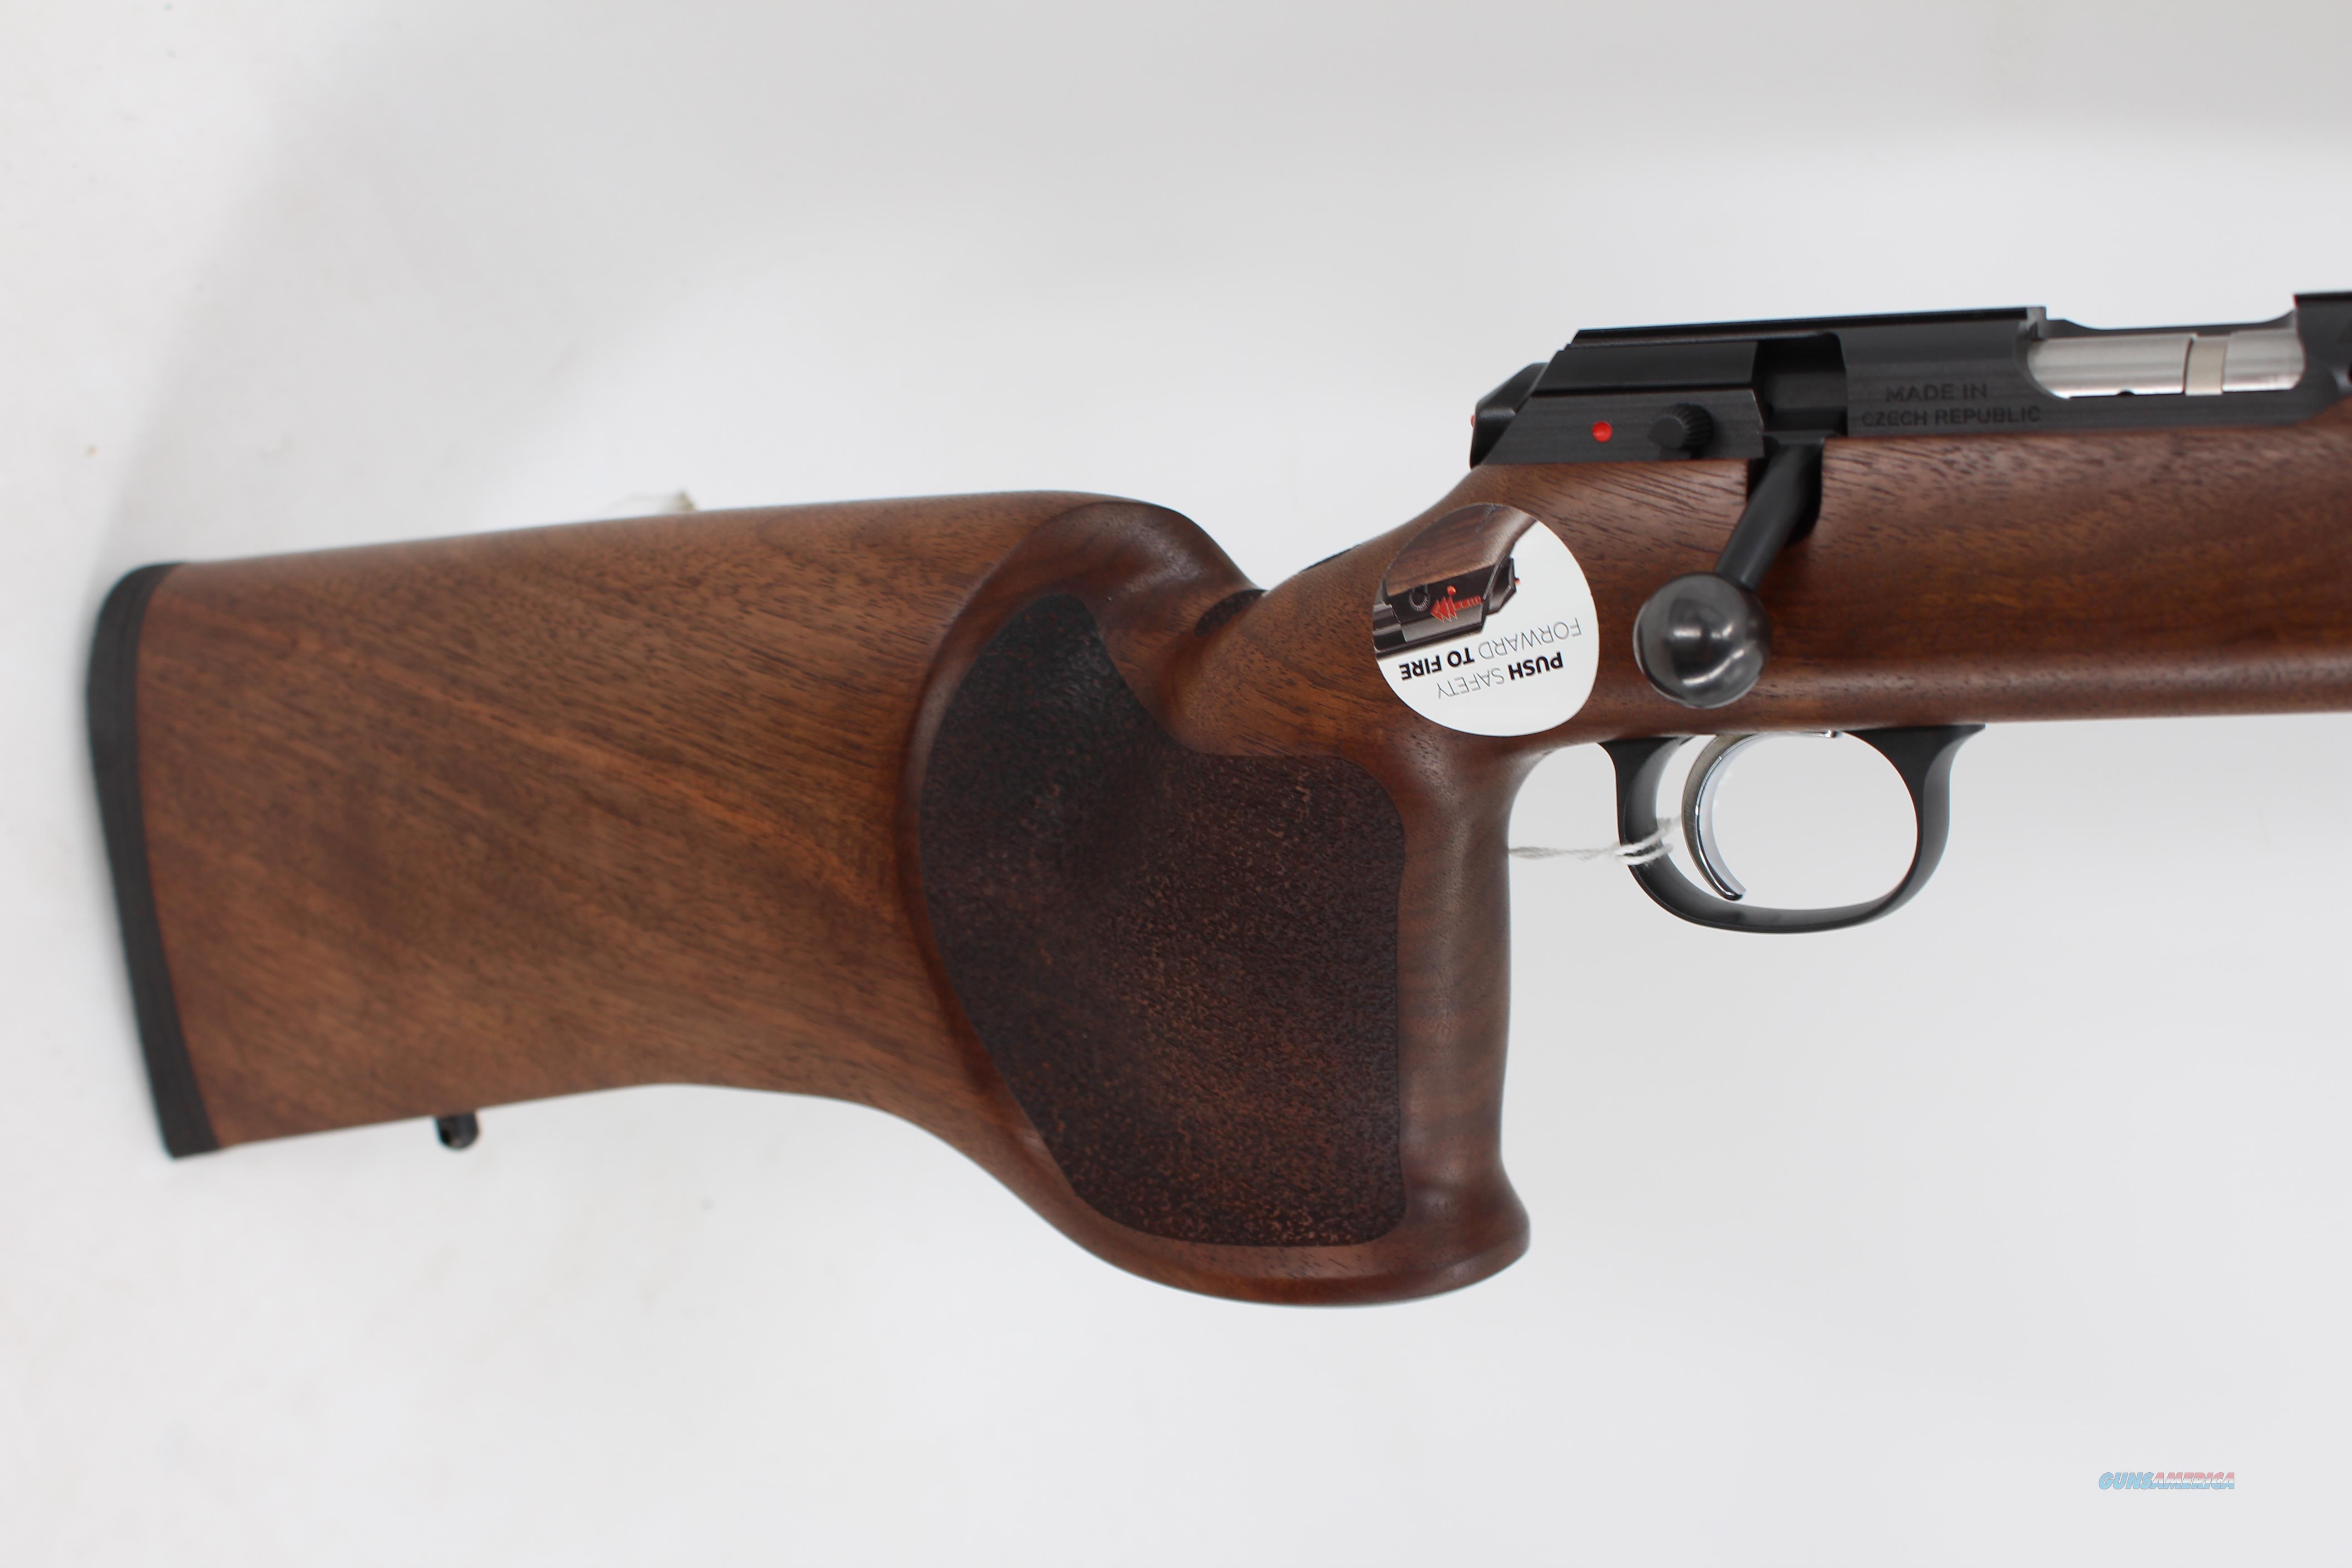 cz 457 mtr for sale